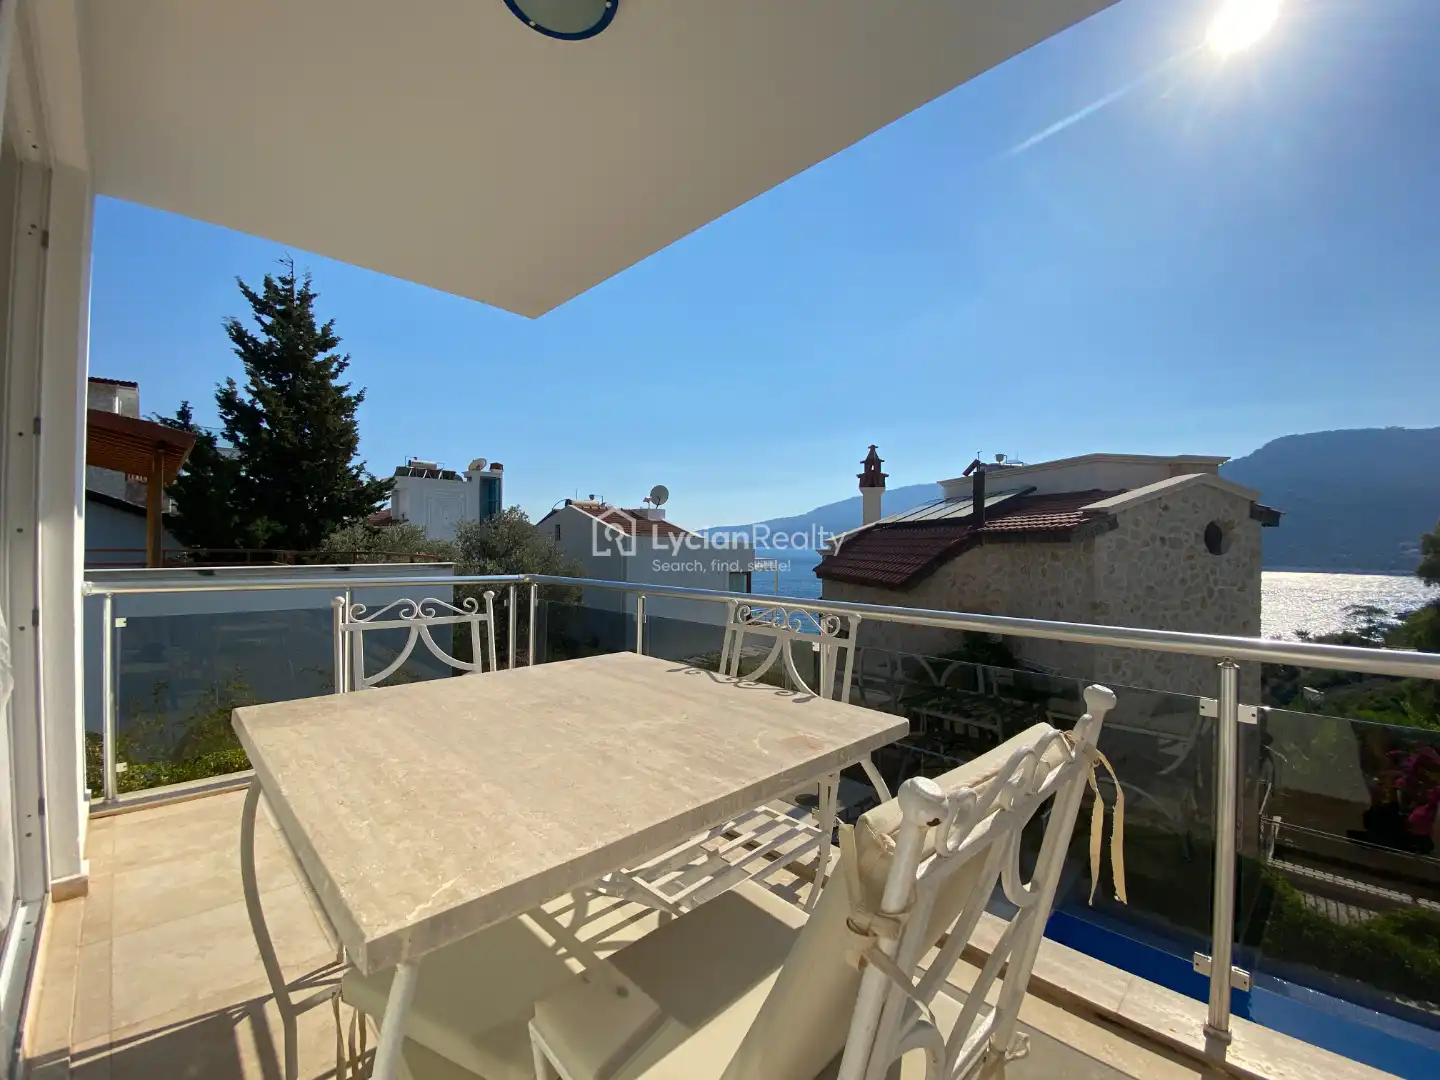 VILLA METIS | Villa with Jacuzzi and View